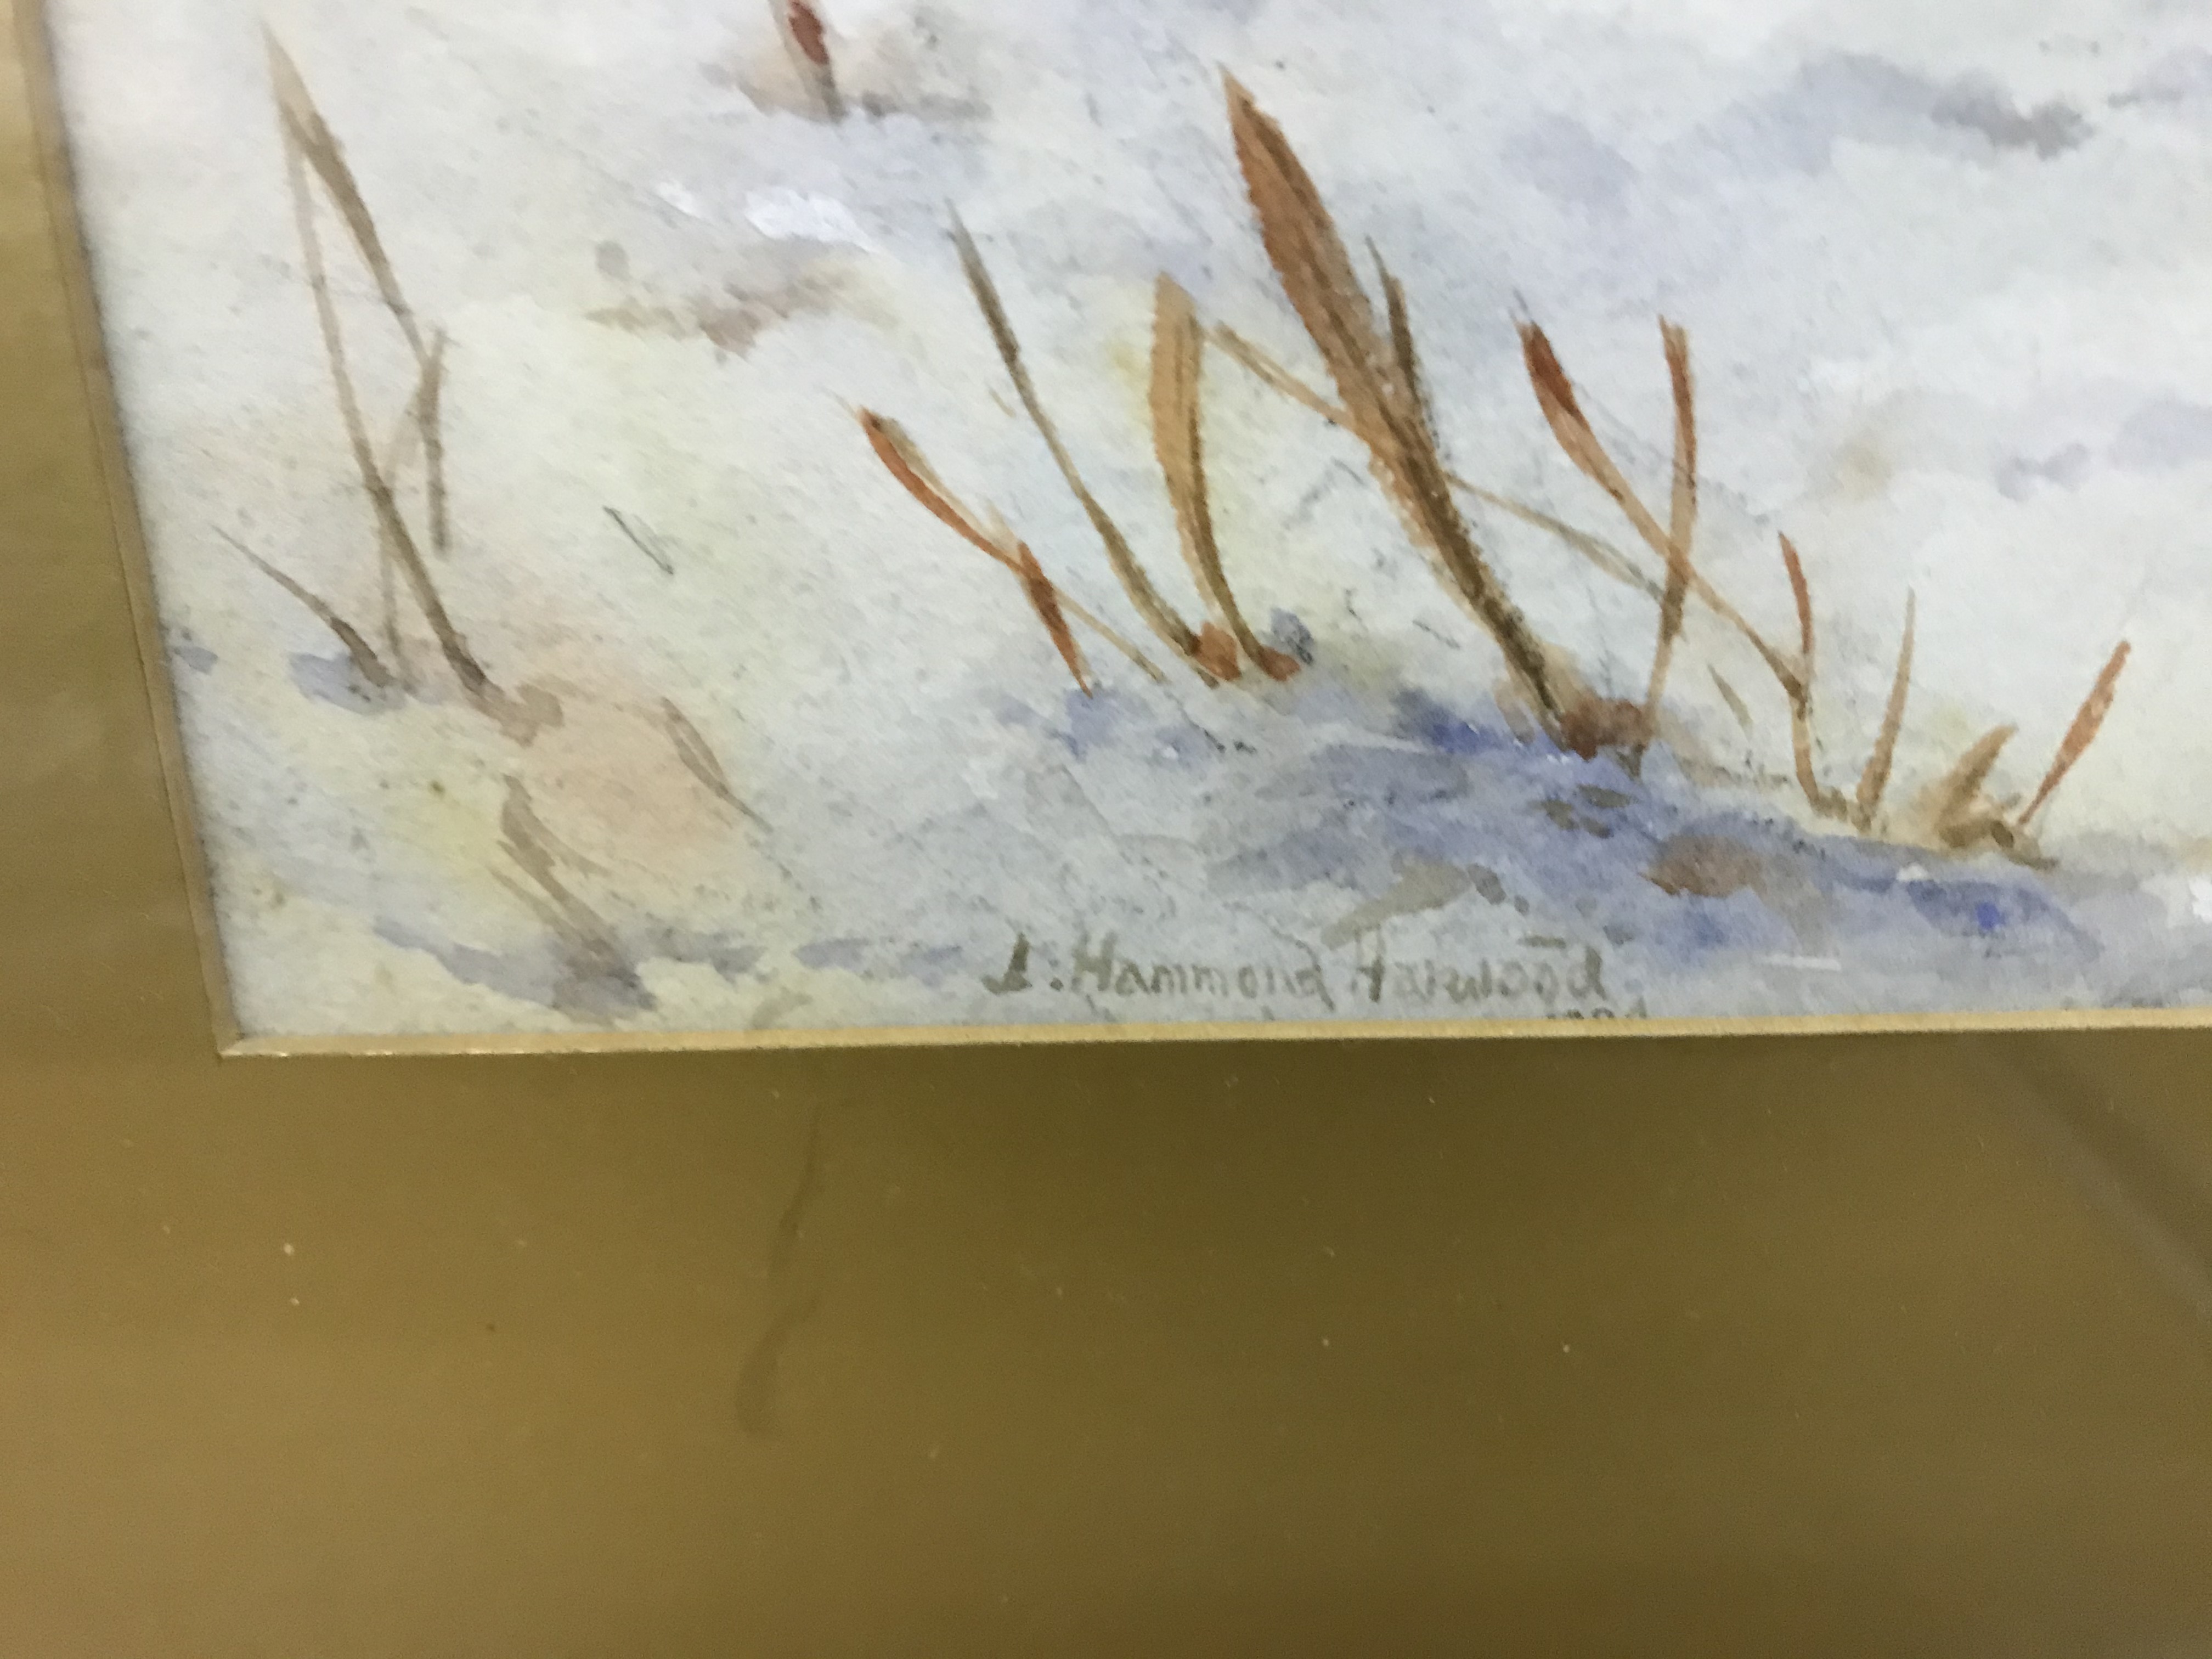 J HAMMOND HARWOOD "English Grey Legged Partridge in Snow", watercolour heightened with white, - Image 15 of 18